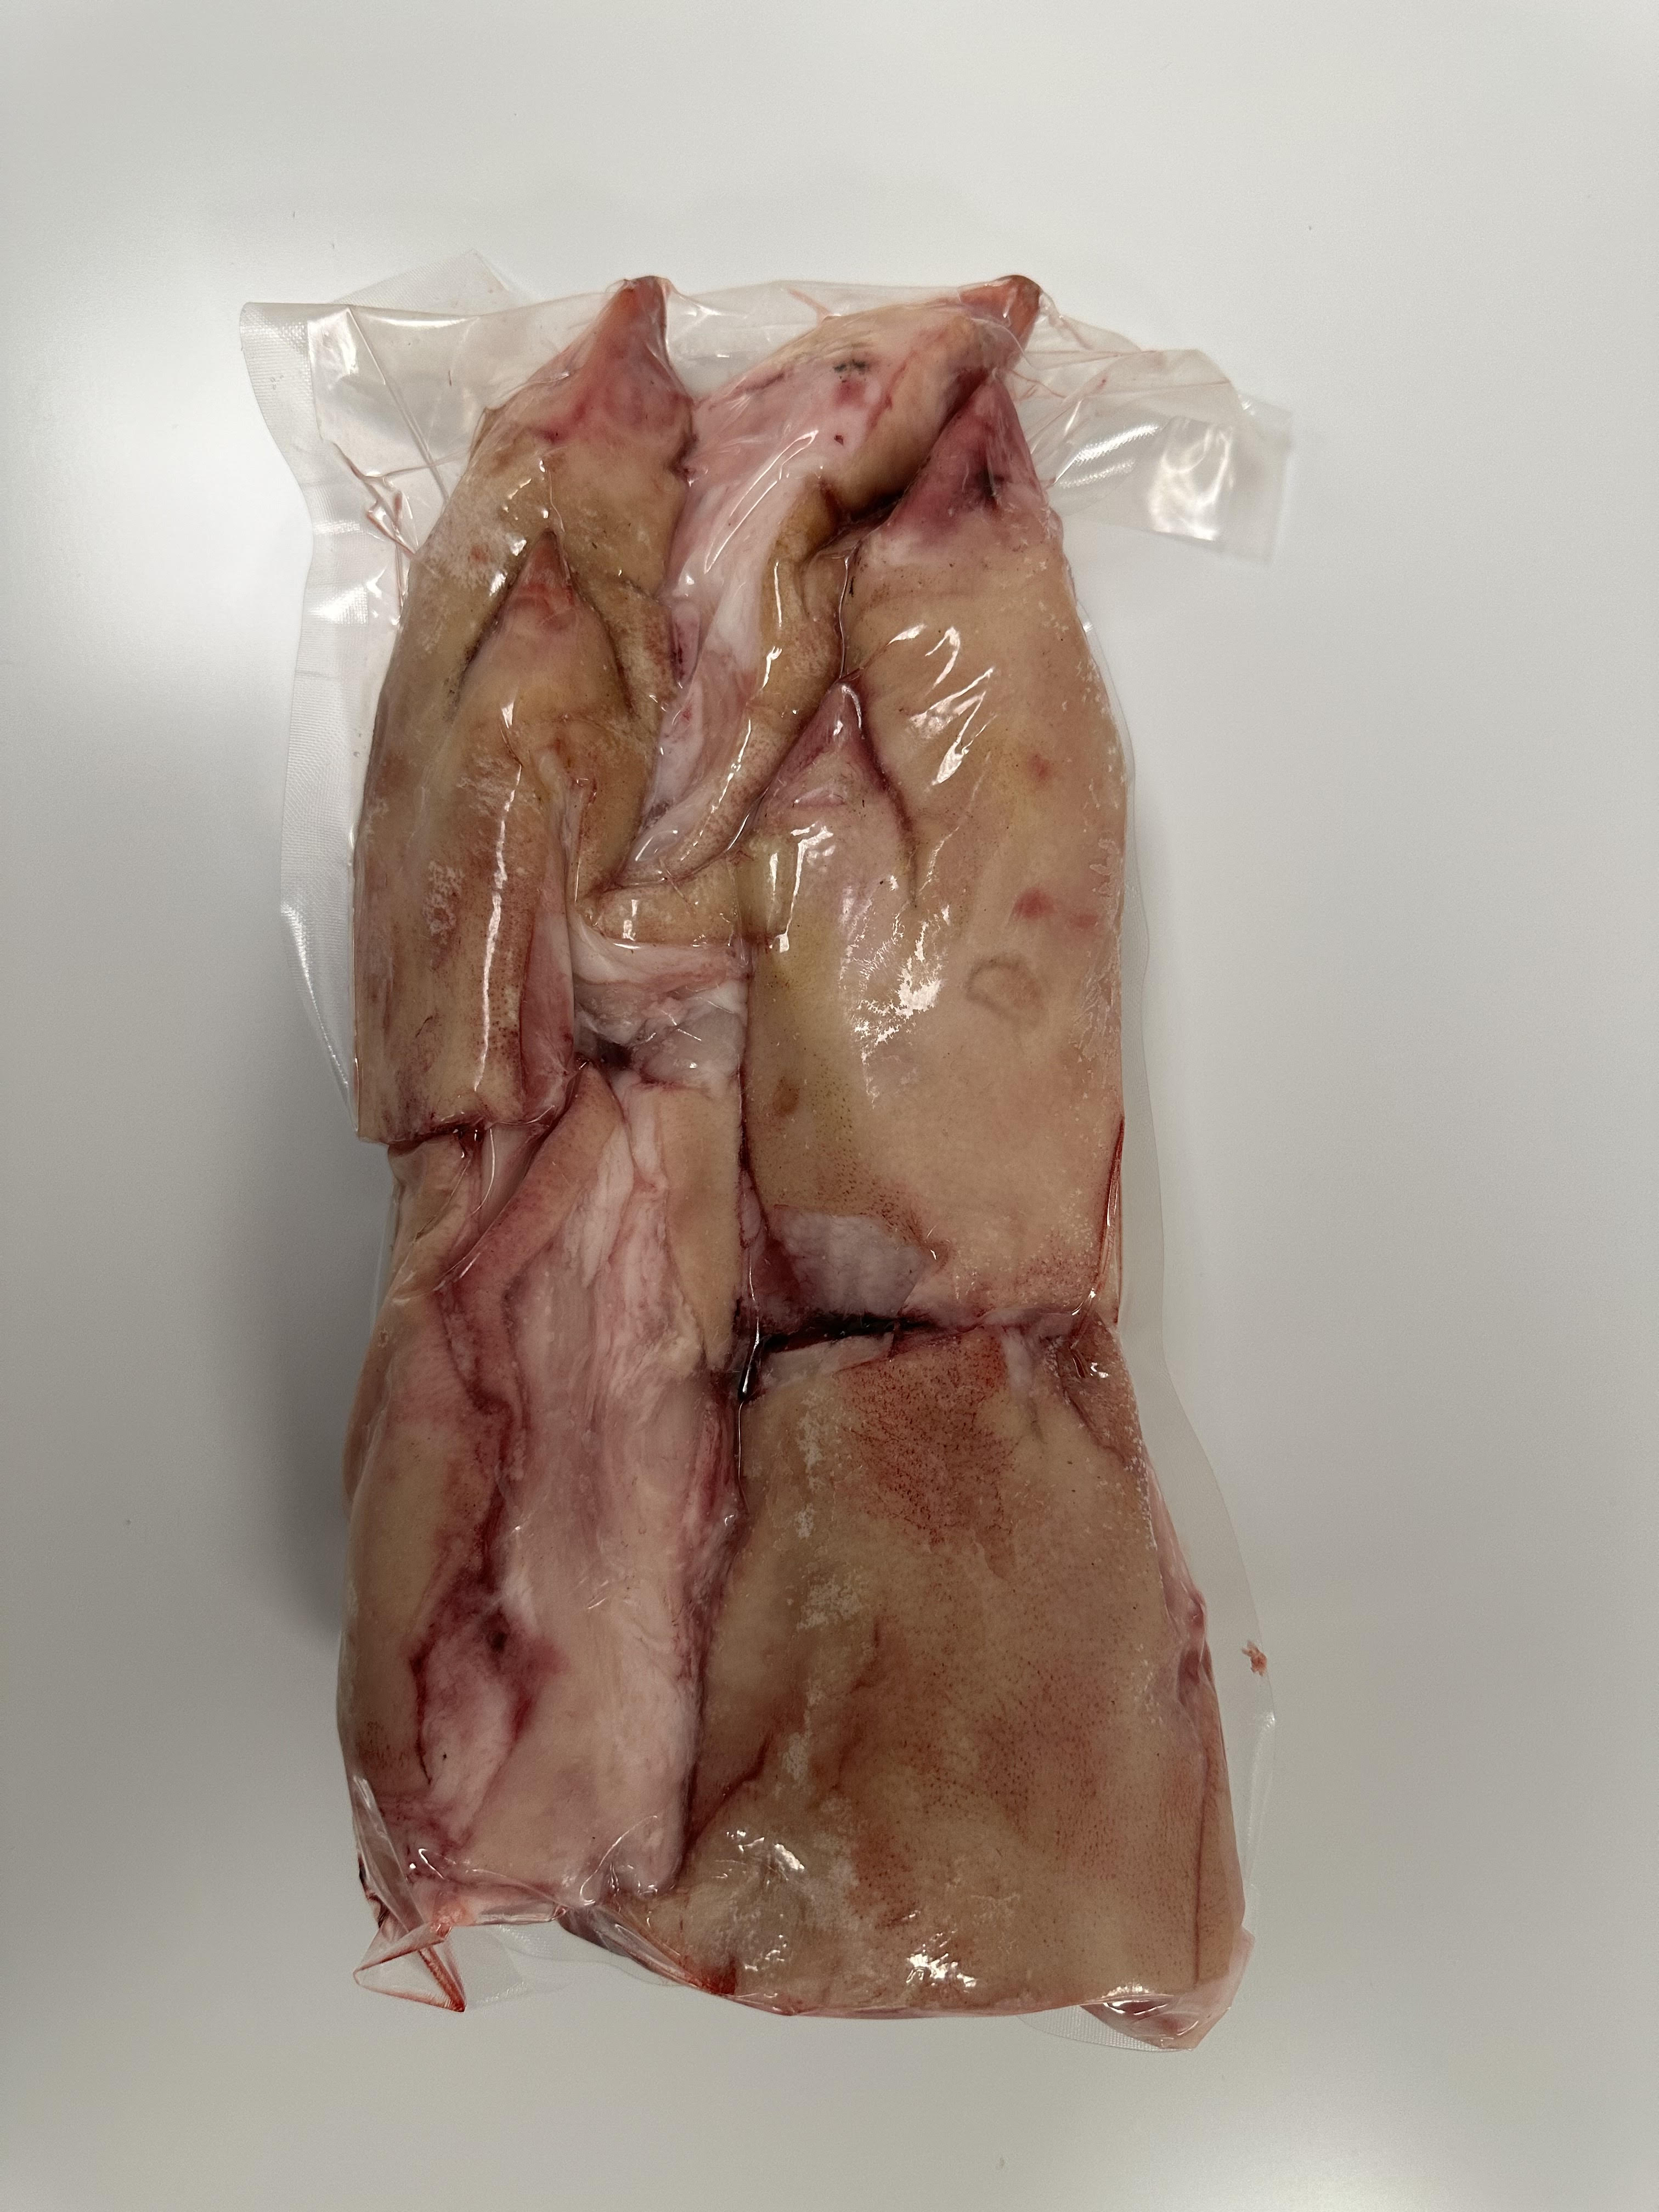 Frozen Pork Trotters Cut in 8 Pieces (About 3.5LB/Pack)